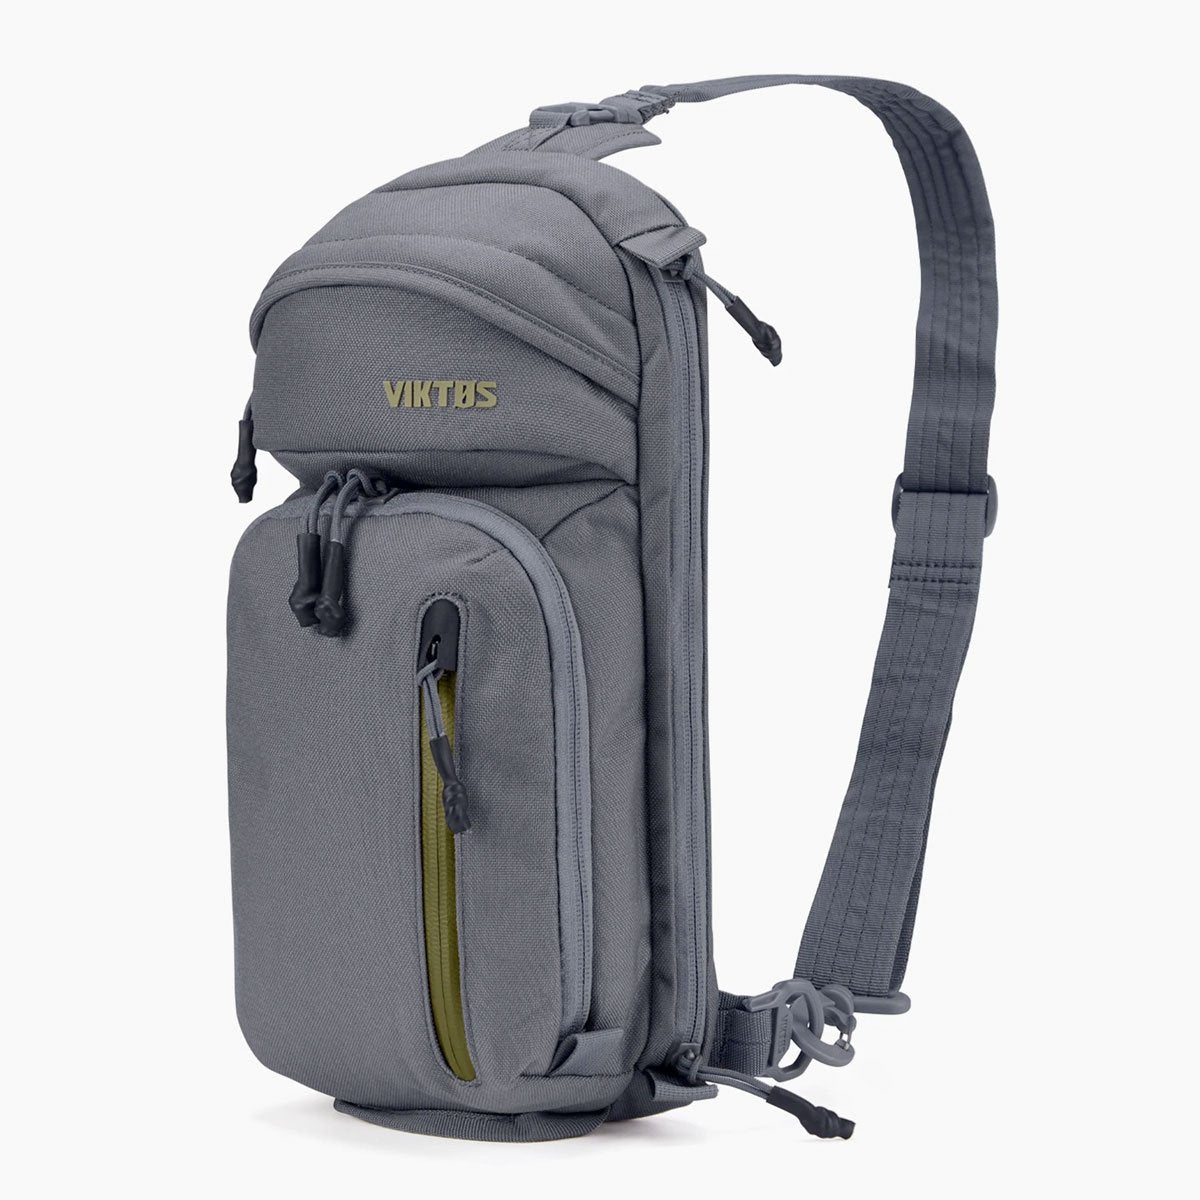 VIKTOS Upscale 2 Sling Bag Bags, Packs and Cases VIKTOS Midwatch Tactical Gear Supplier Tactical Distributors Australia